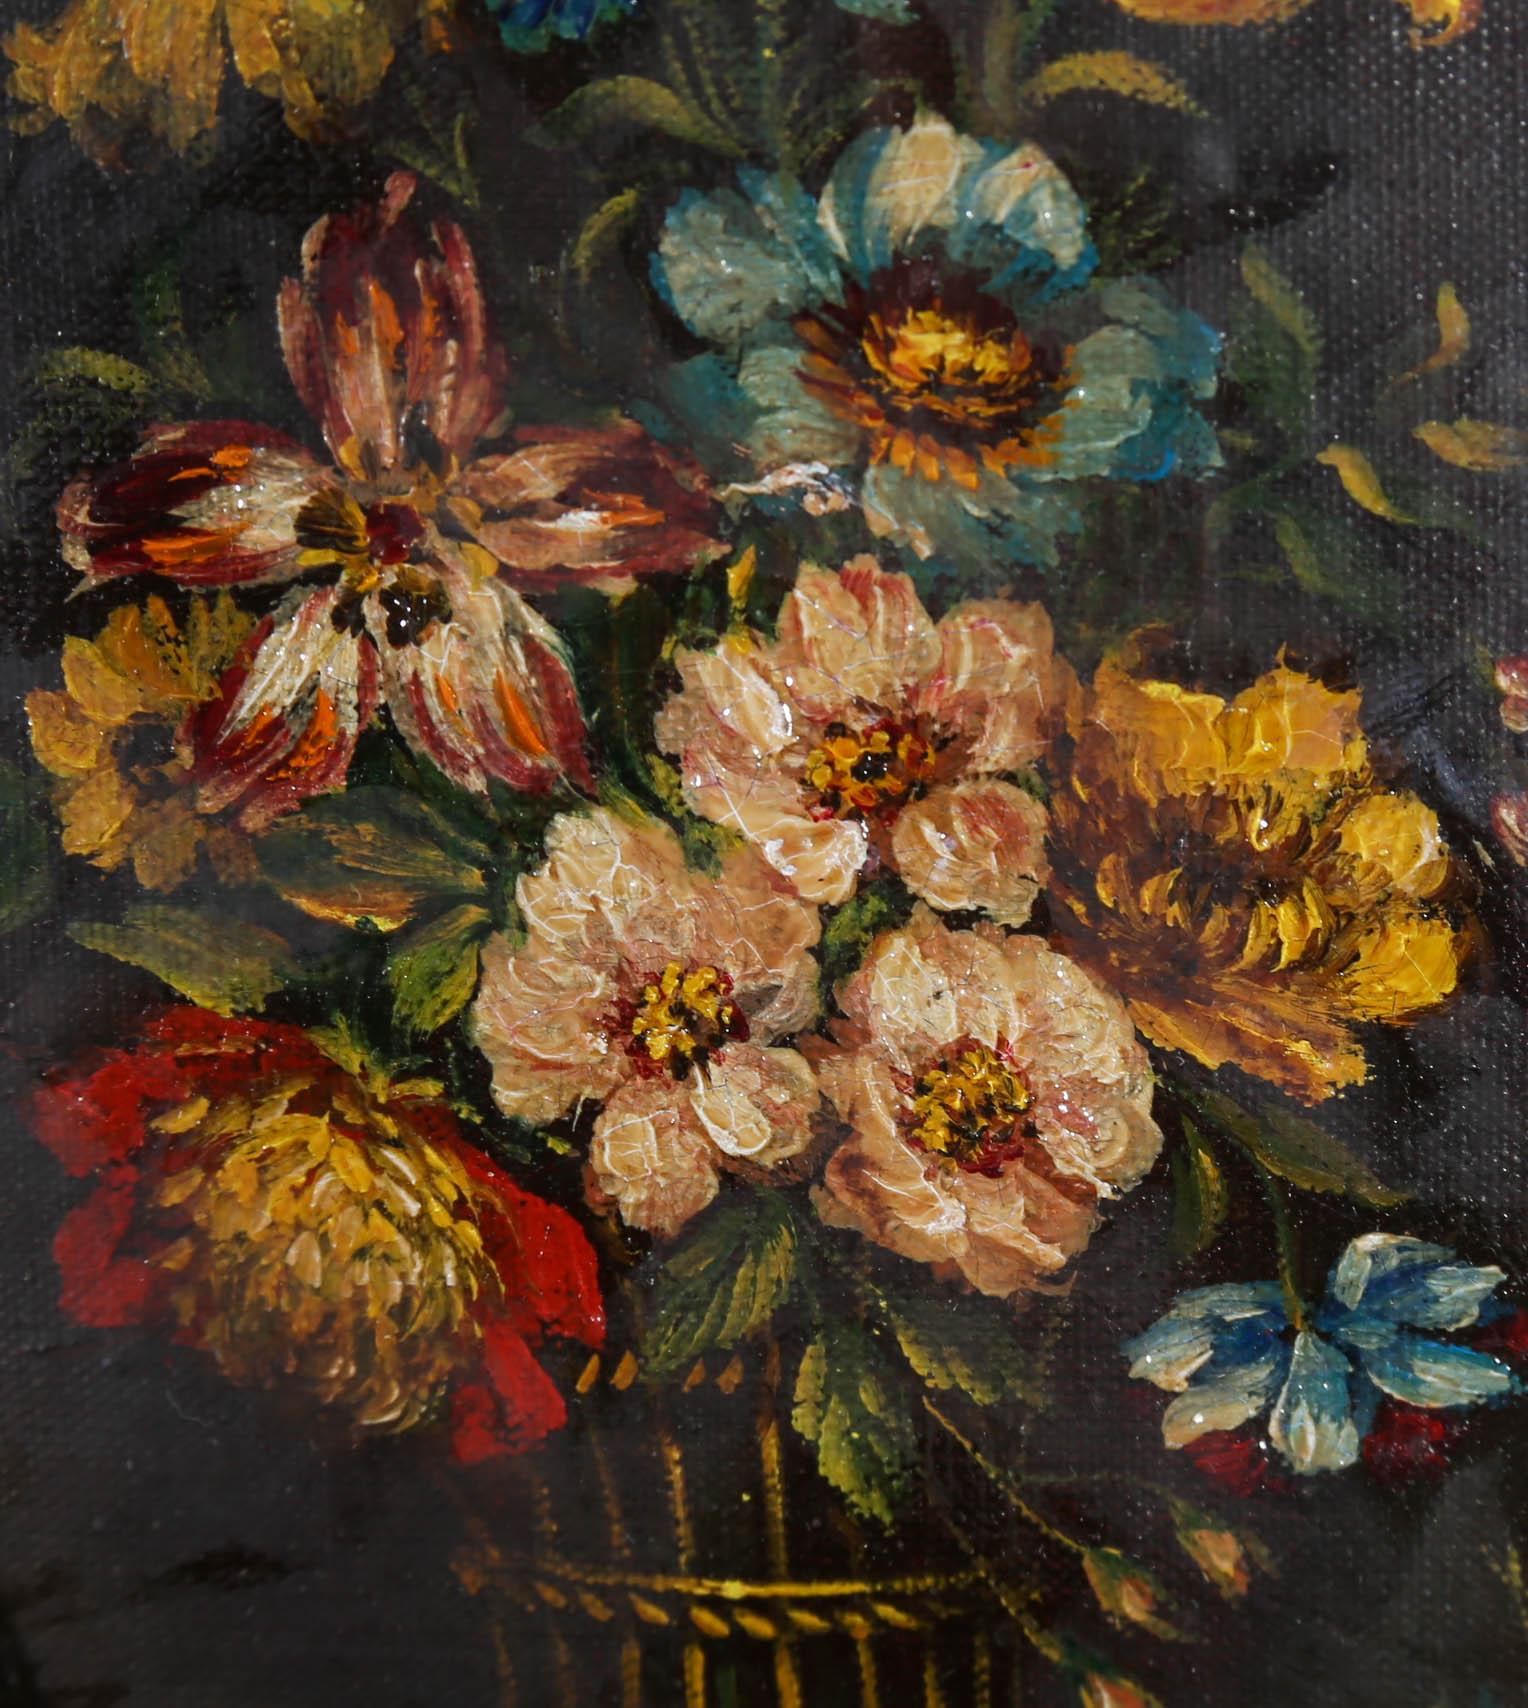 A Pair of 20th Century Italian School Oils - Floral Still Life Studies - Painting by Unknown